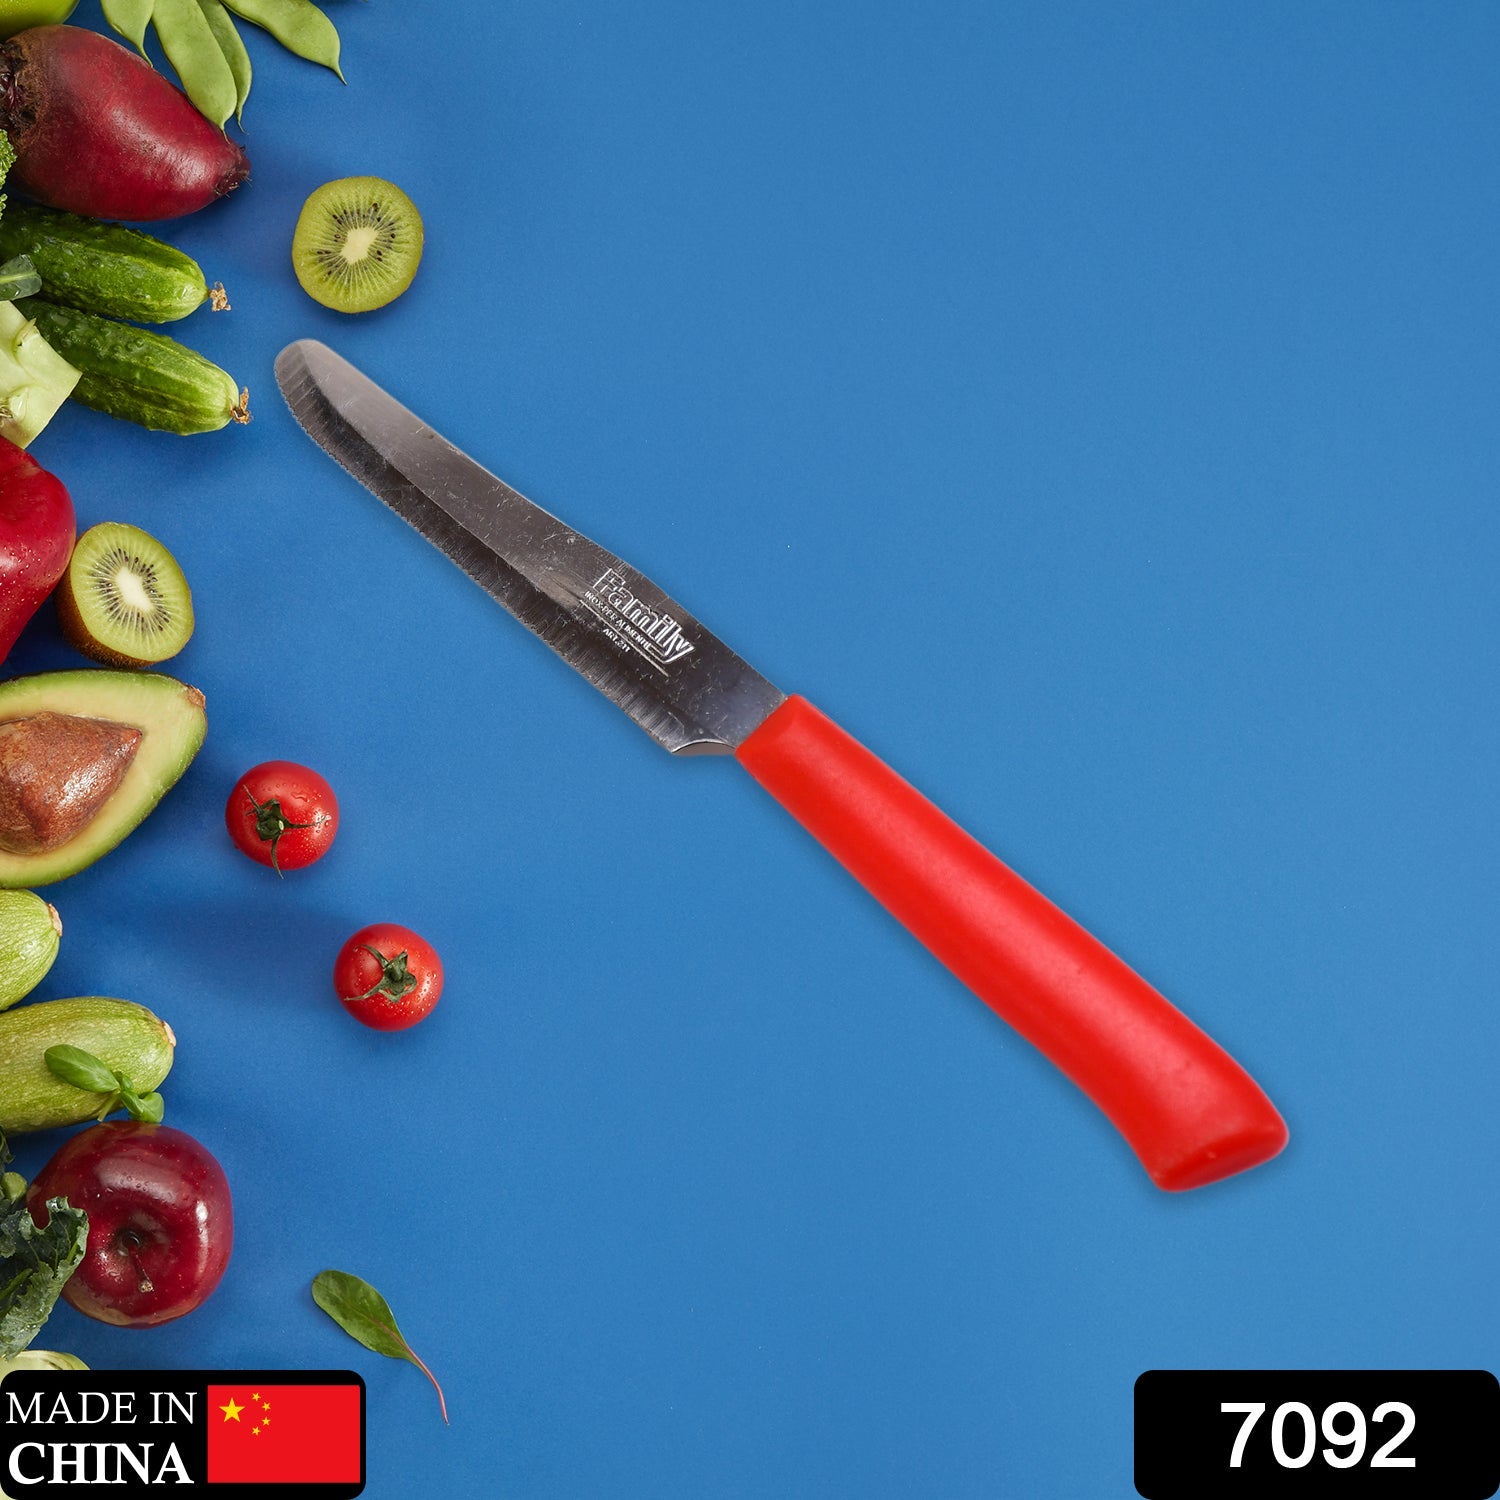 7092 Red Kitchen Knife Steak and Vegetable Knife - Razor Sharp Pointed Tip, Serrated Edge - Color Coded Kitchen Tools by The Kosher Cook DeoDap